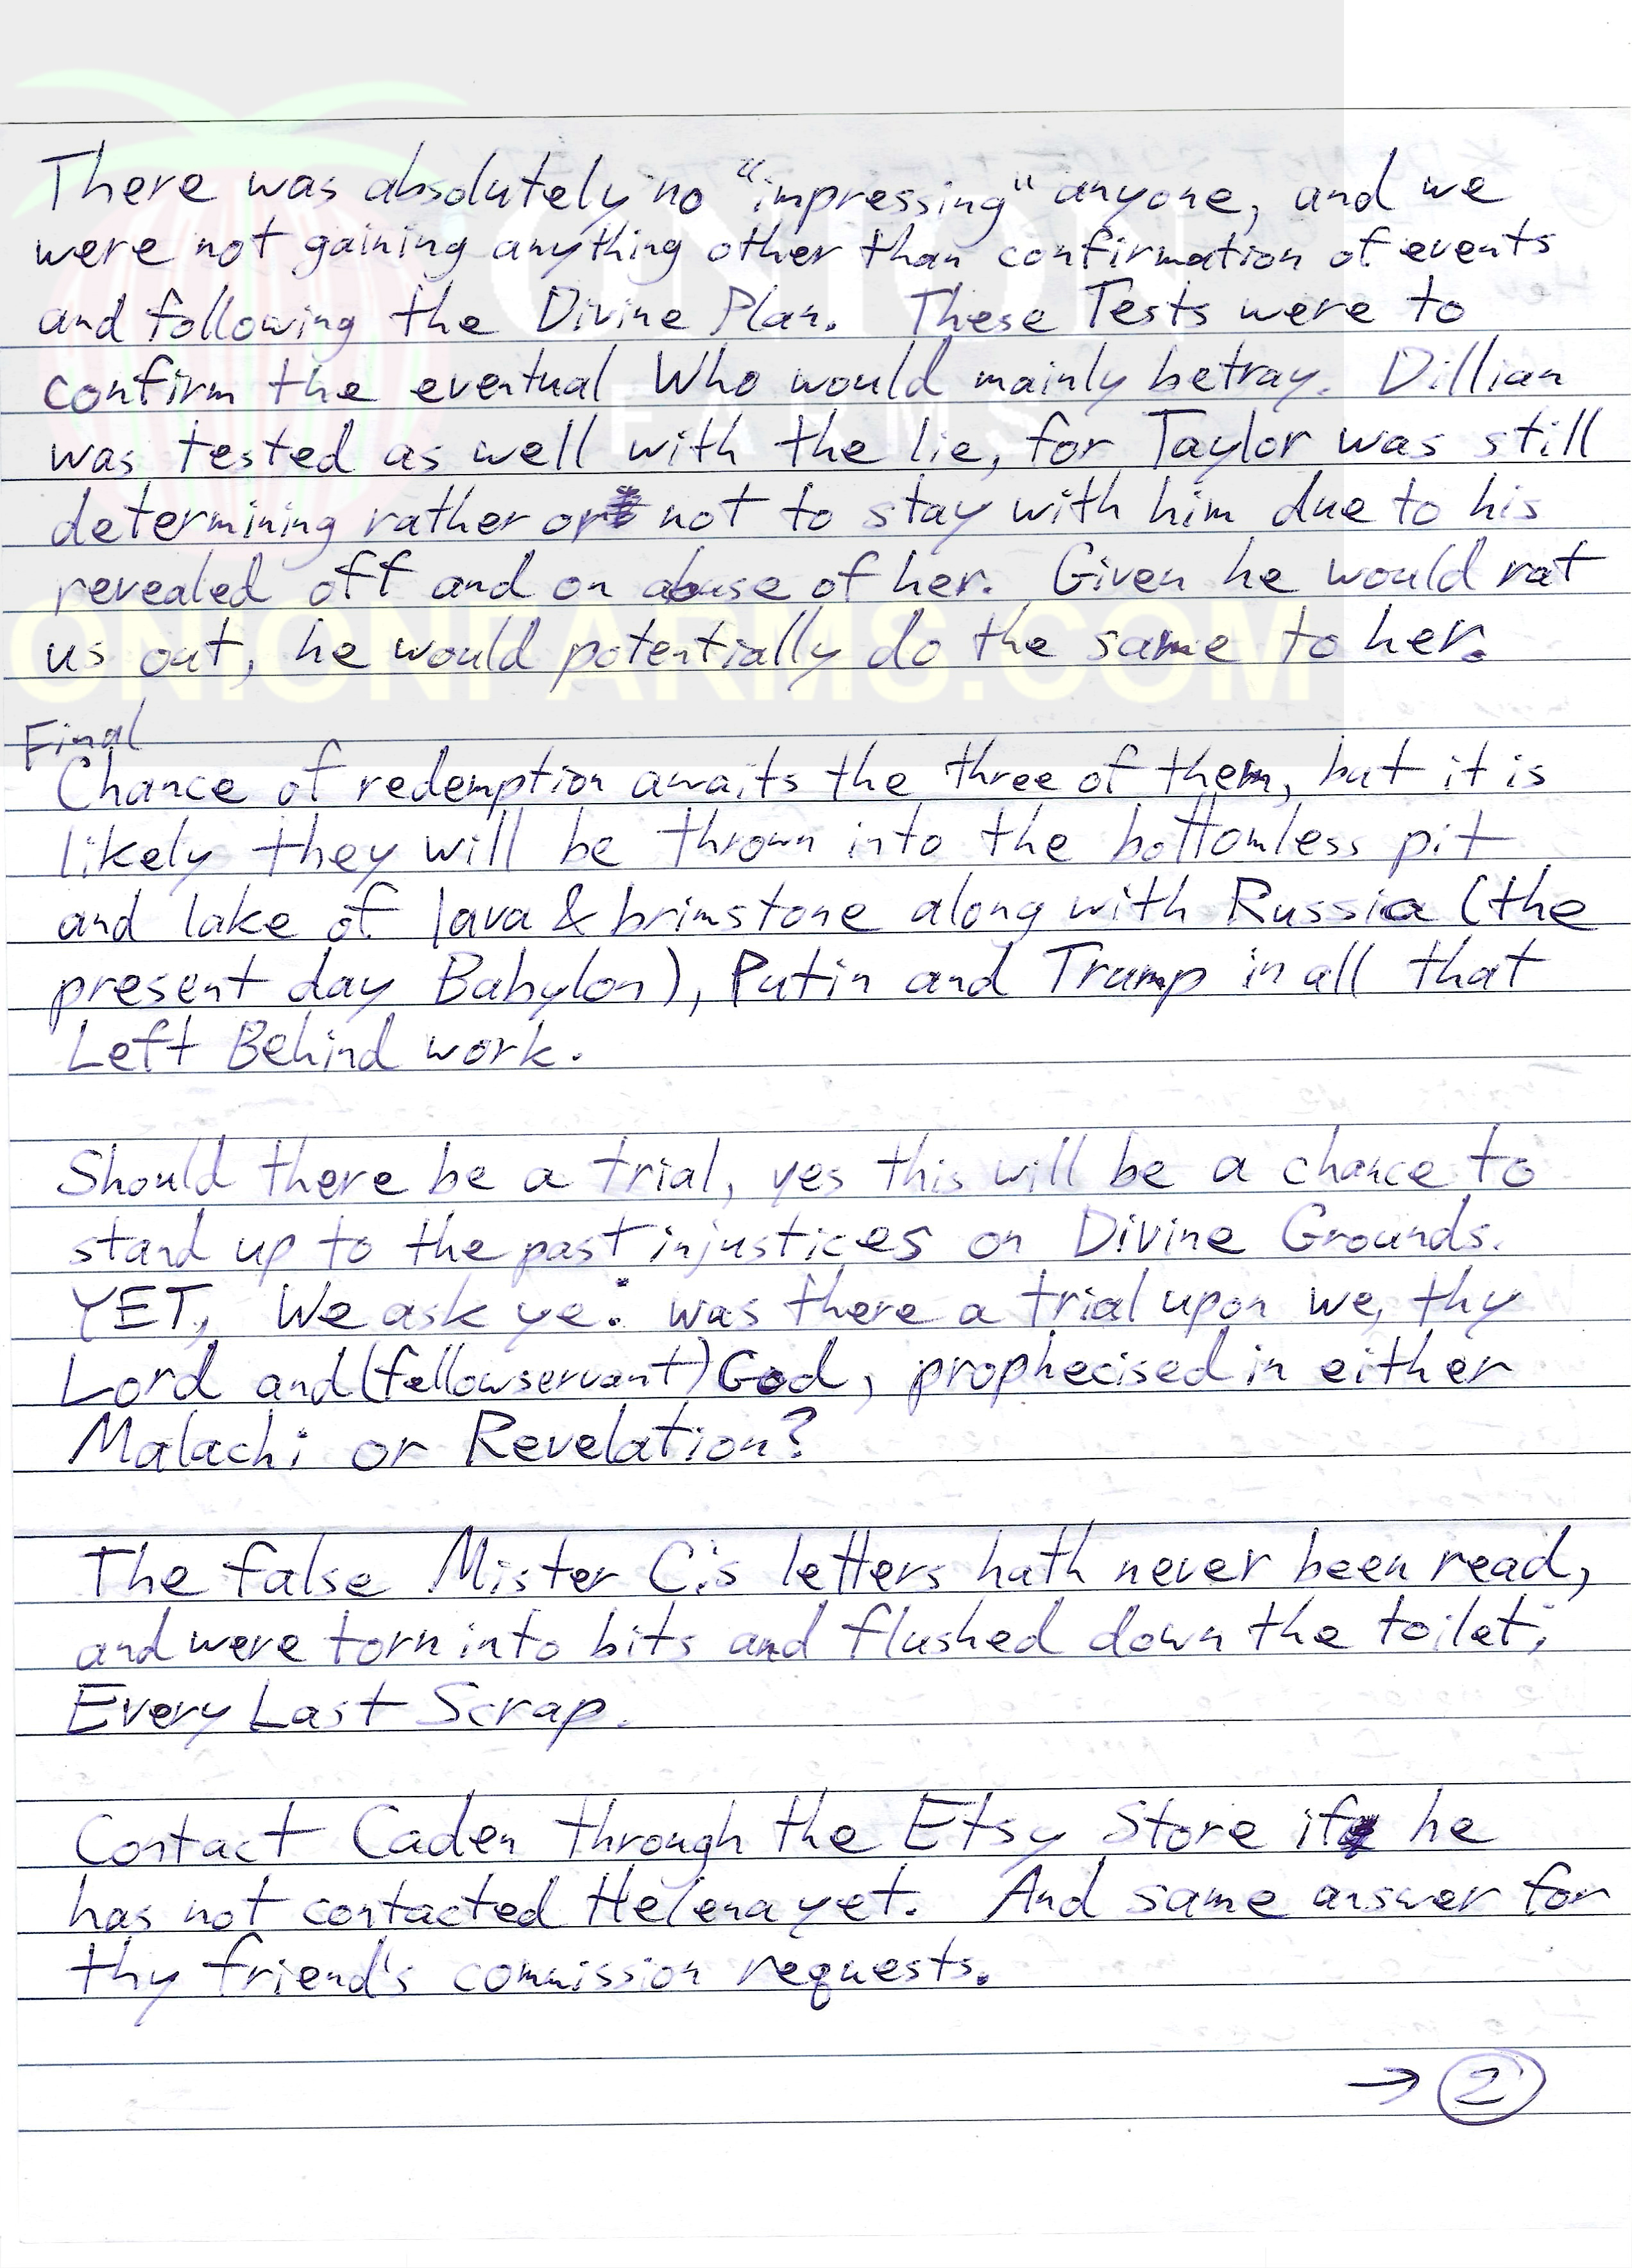 Helena Letter Page 2.jpg